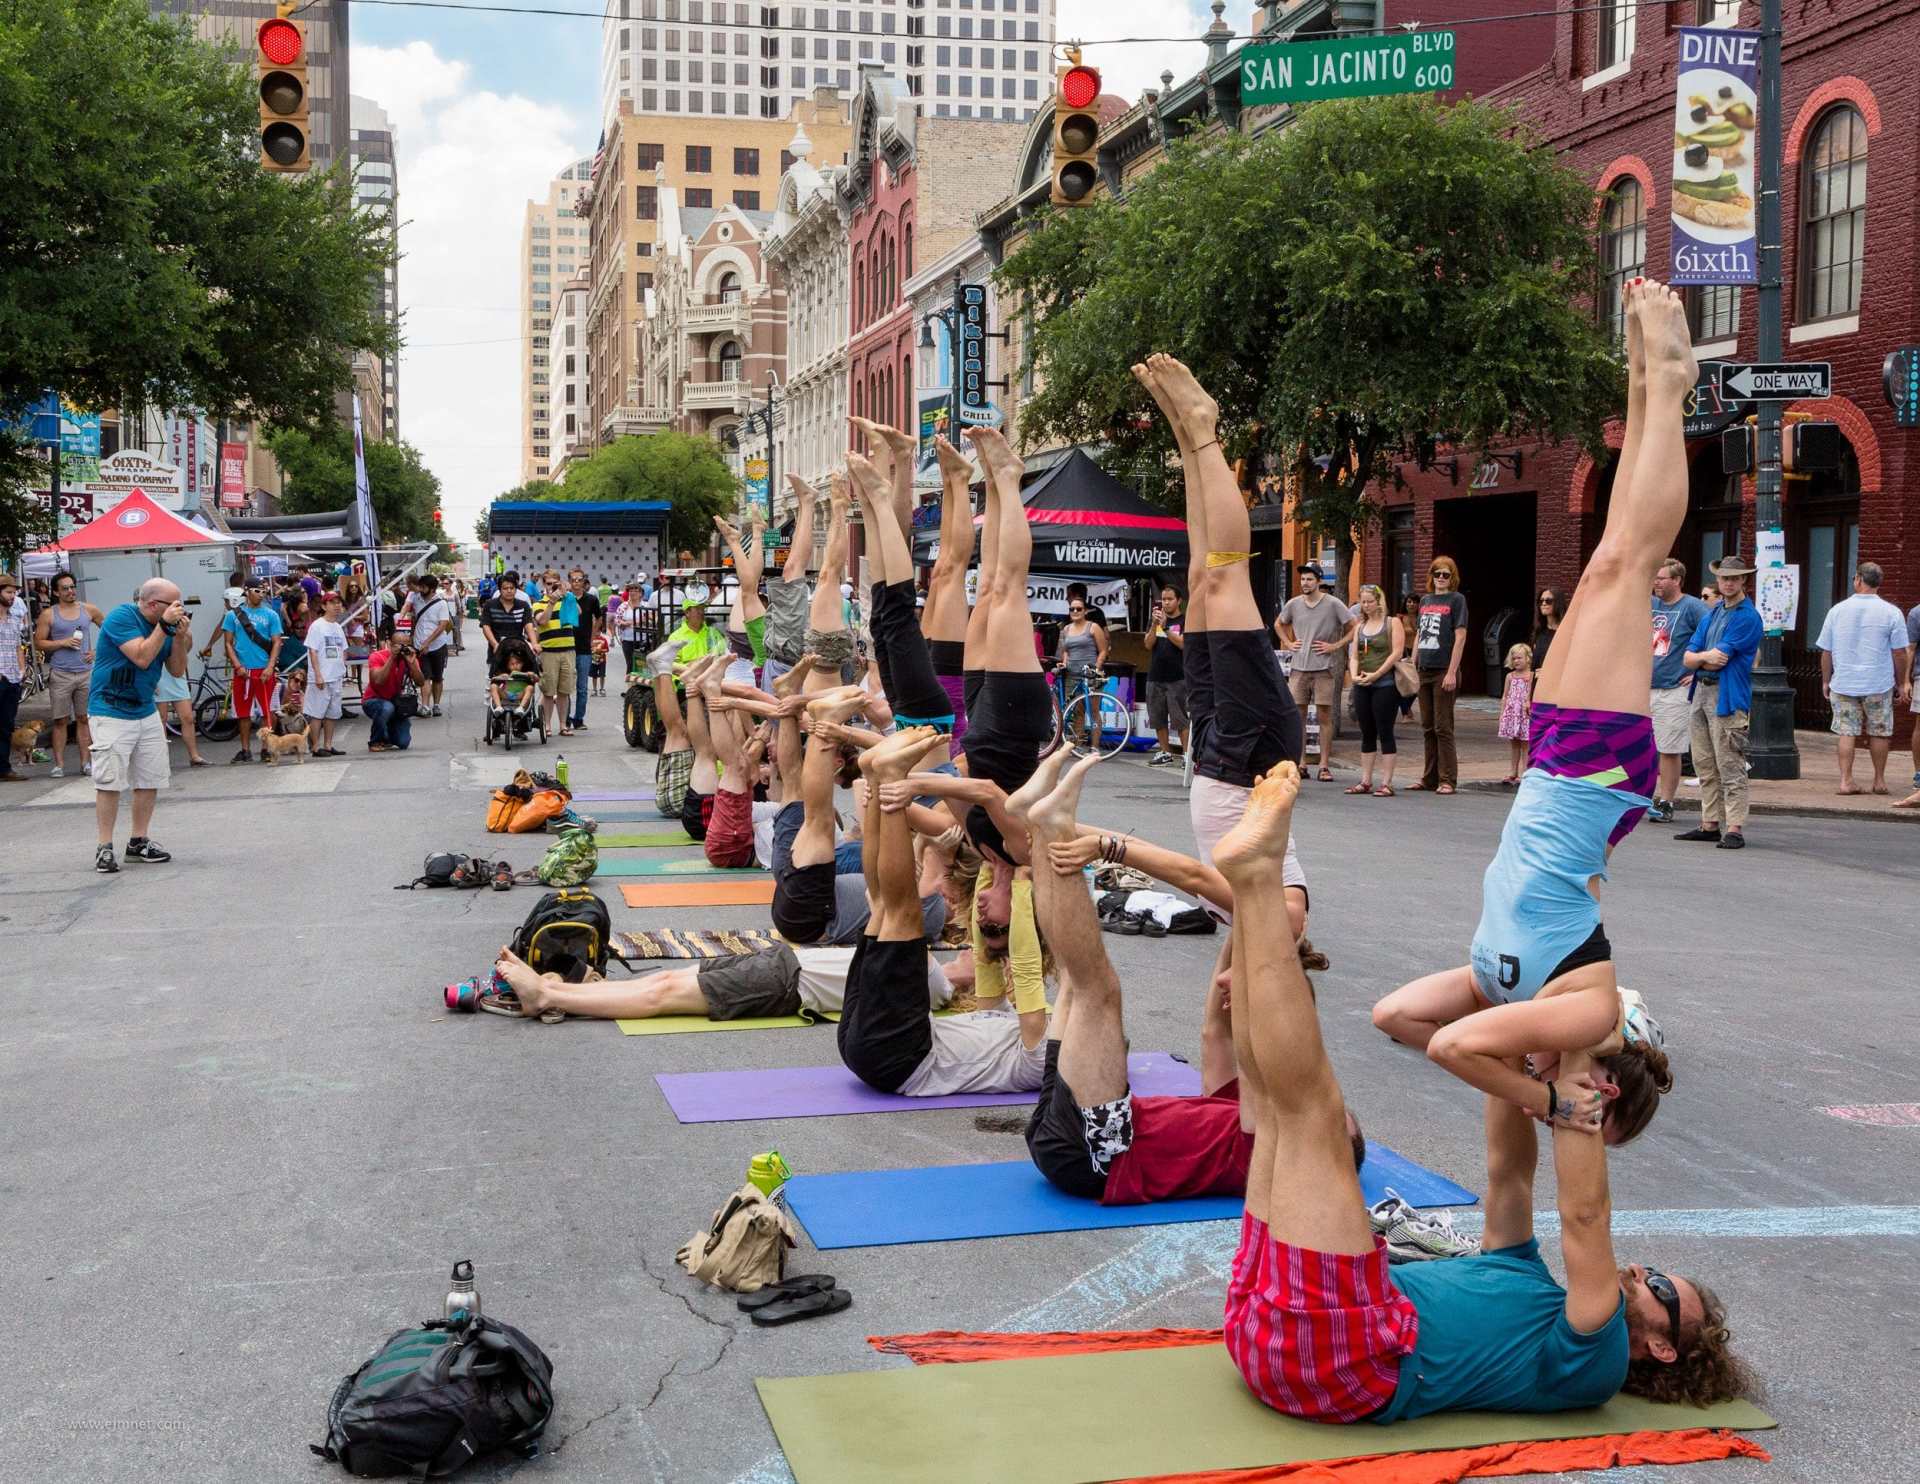 Young professionals gather in downtown Austin for an AcroYoga flashmob, typical of the cultural happenings Austin has to offer. (Credit: Wikimedia Commons/Earl McGehee)
